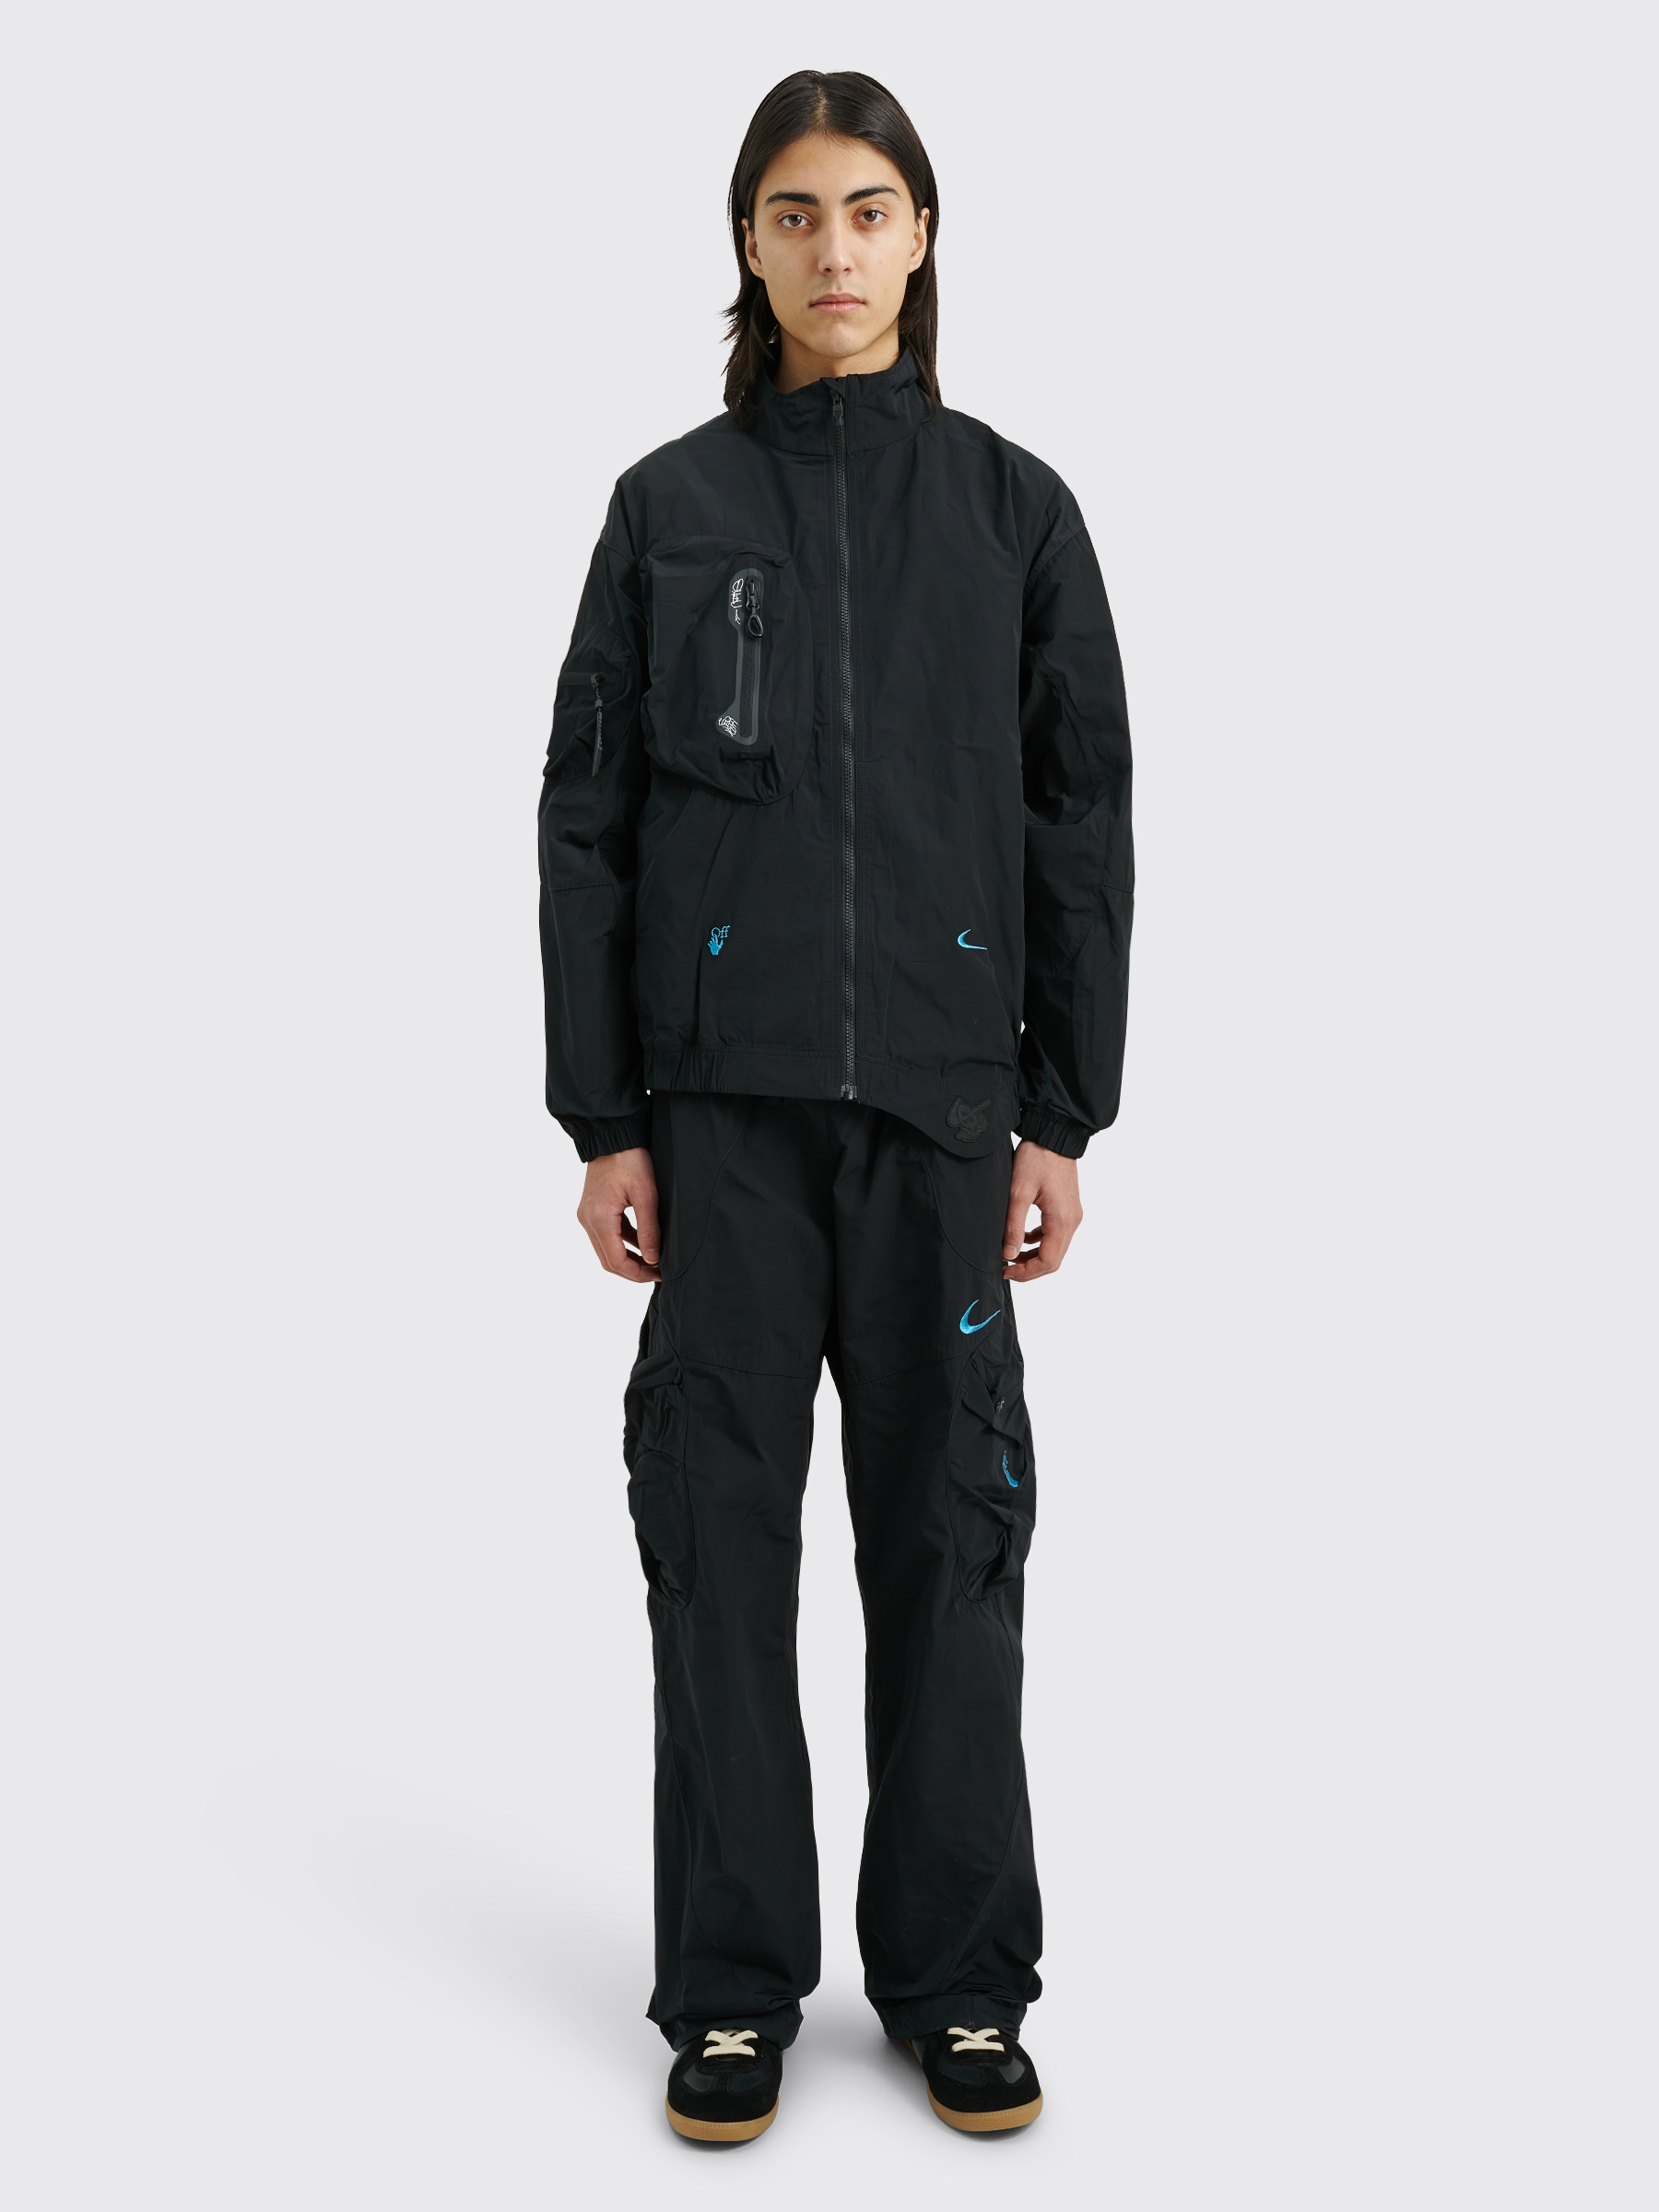 NIKE x Off-White Tracksuit 003 